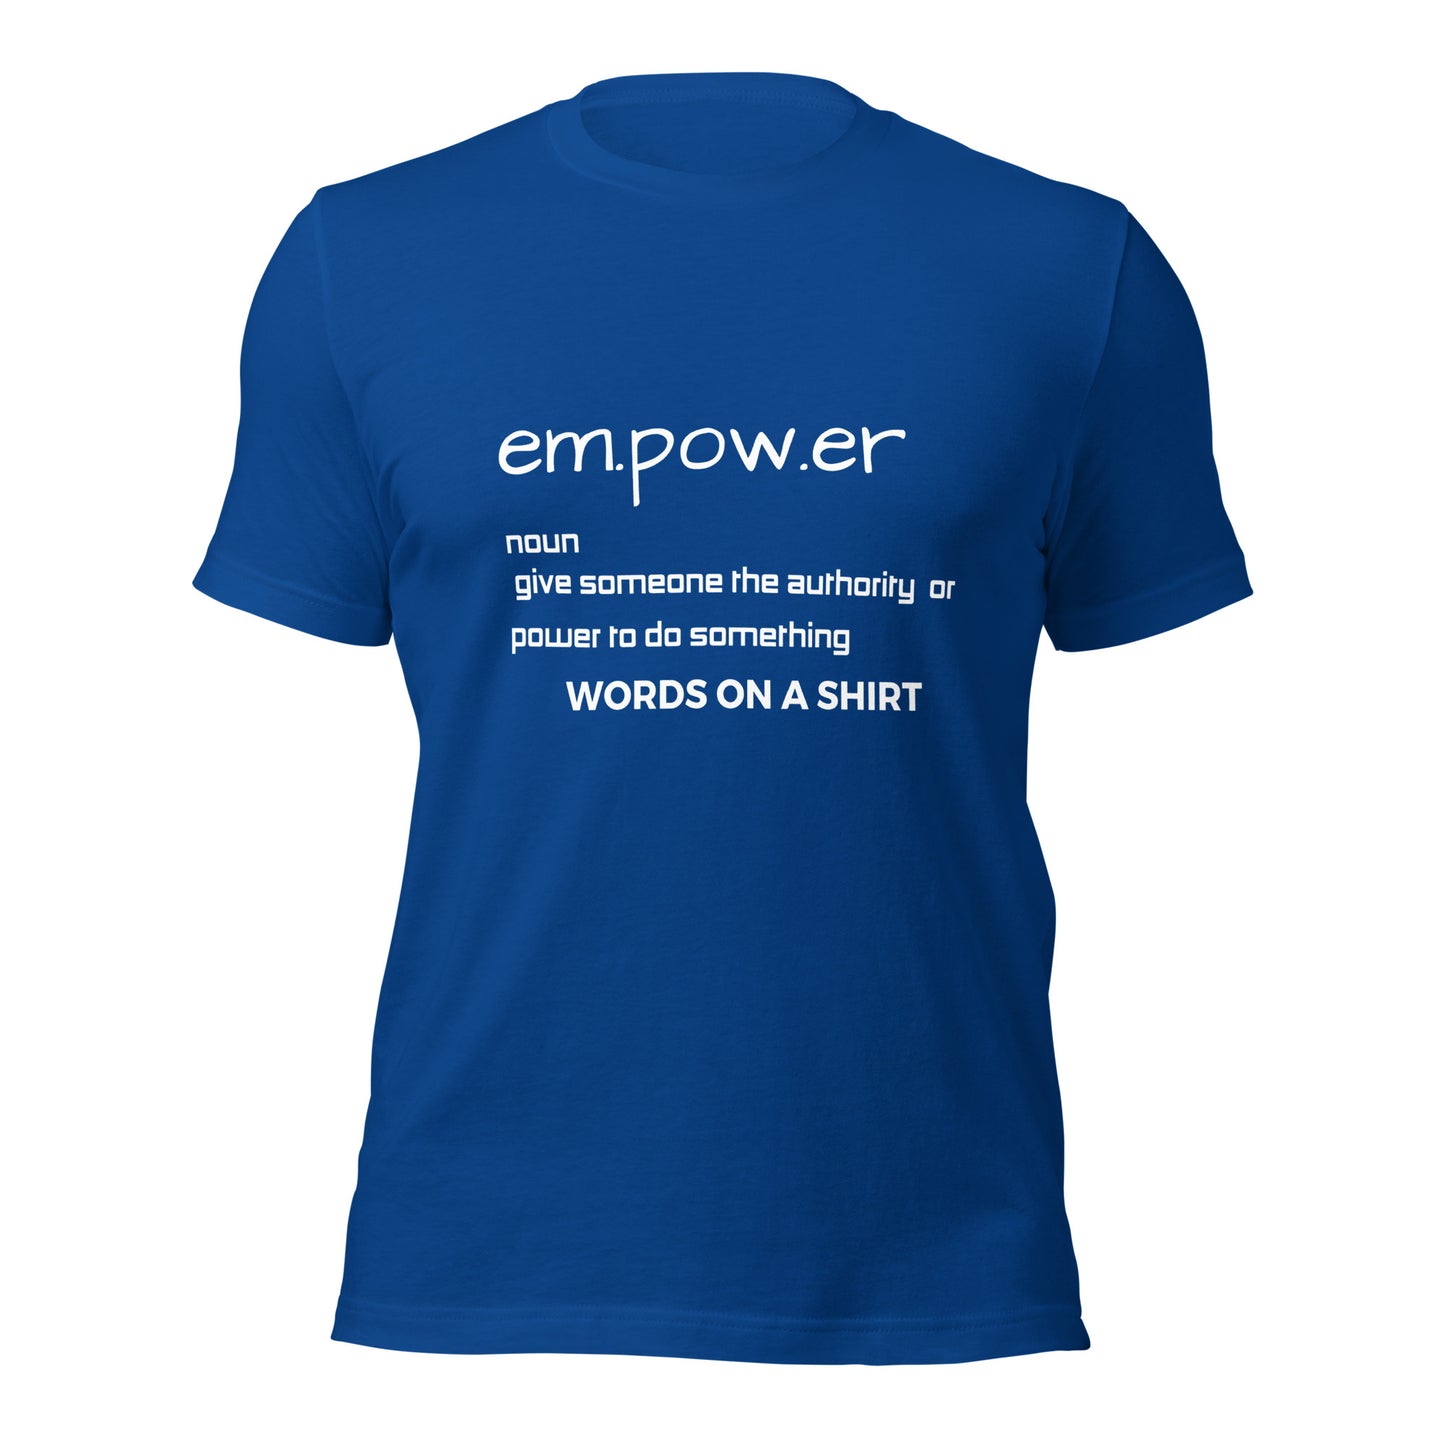 Experience our premium 100% cotton t-shirt with pre-shrunk comfort and side-seamed precision that'll give you the perfect fit. Conquer with Empower Defined!